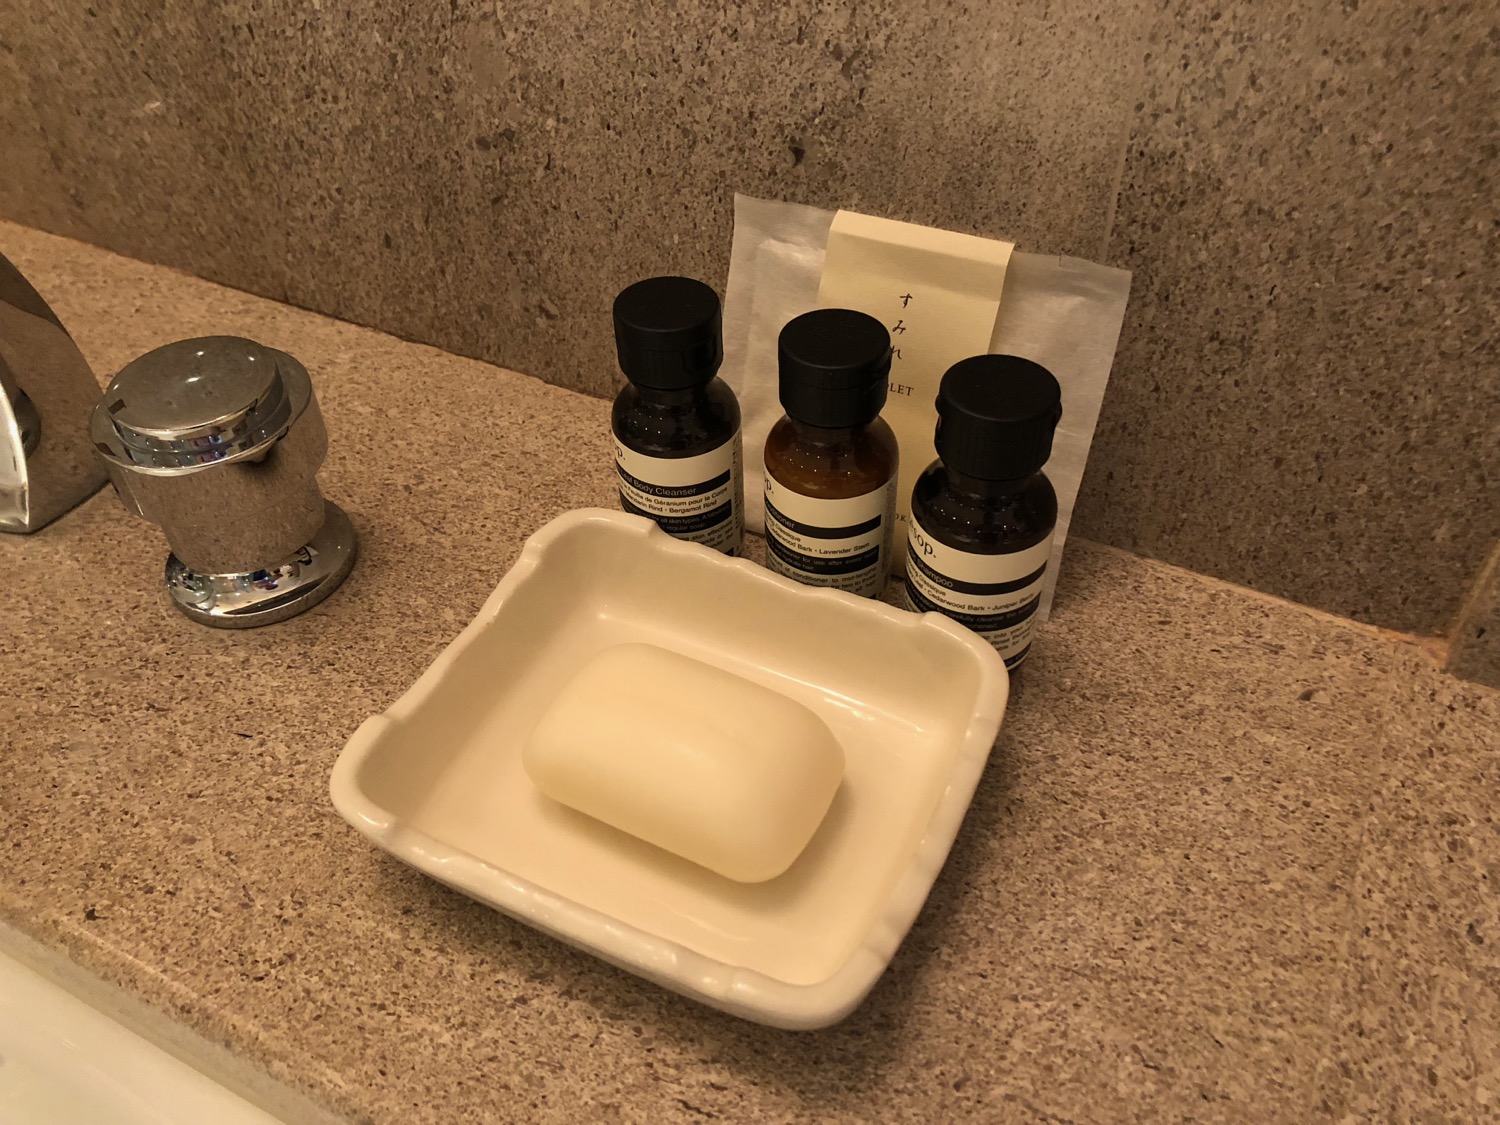 a soap dish and small bottles of liquid on a counter